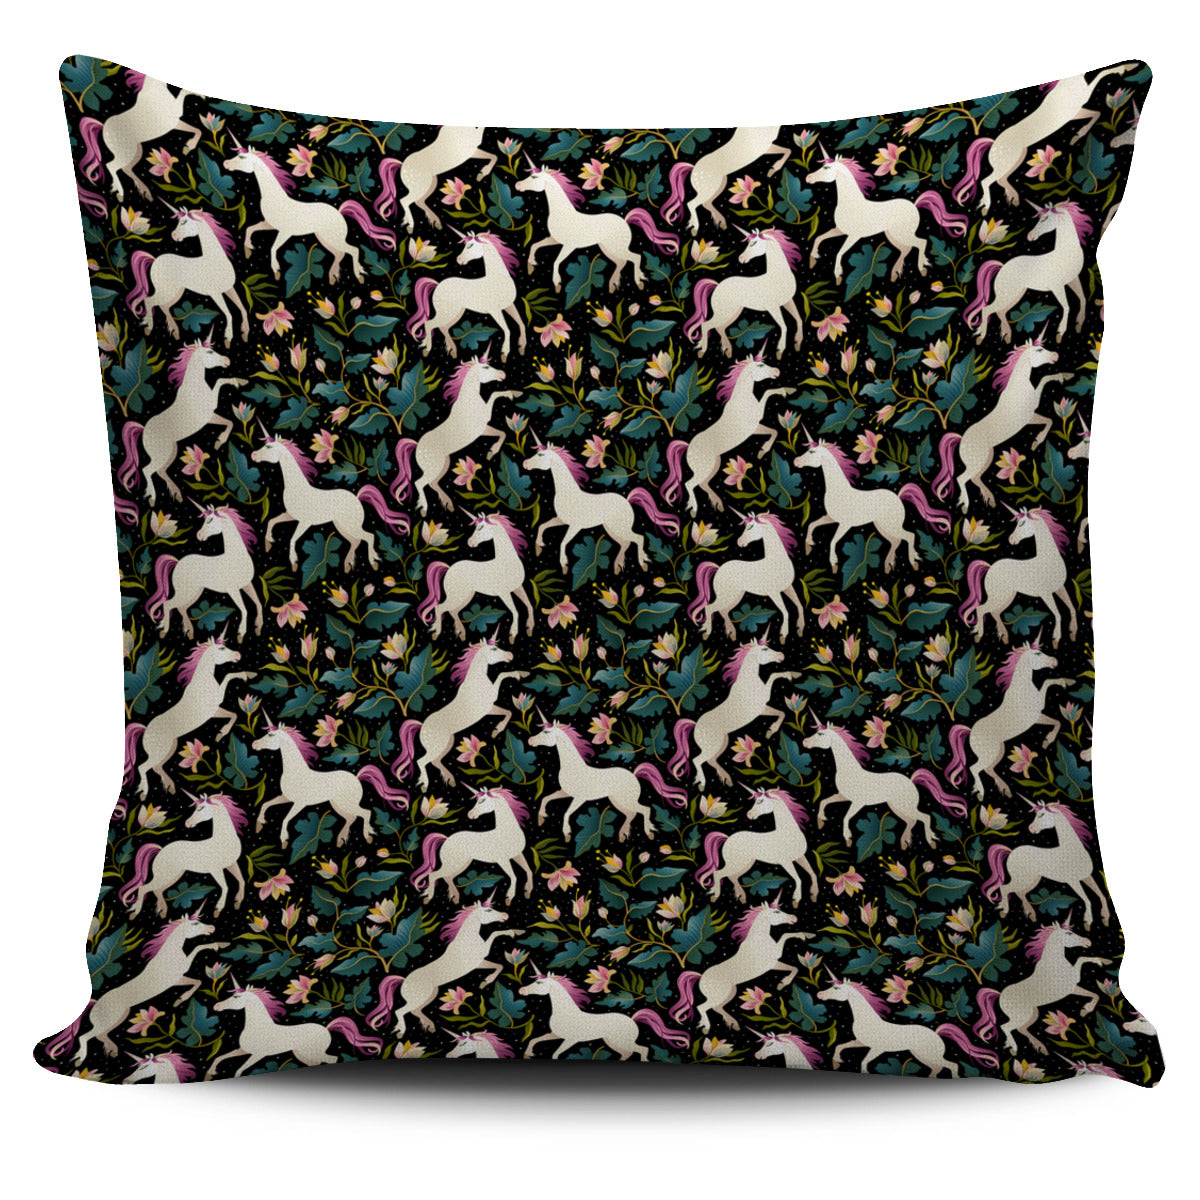 Unicorns Are Real Pillow Cover